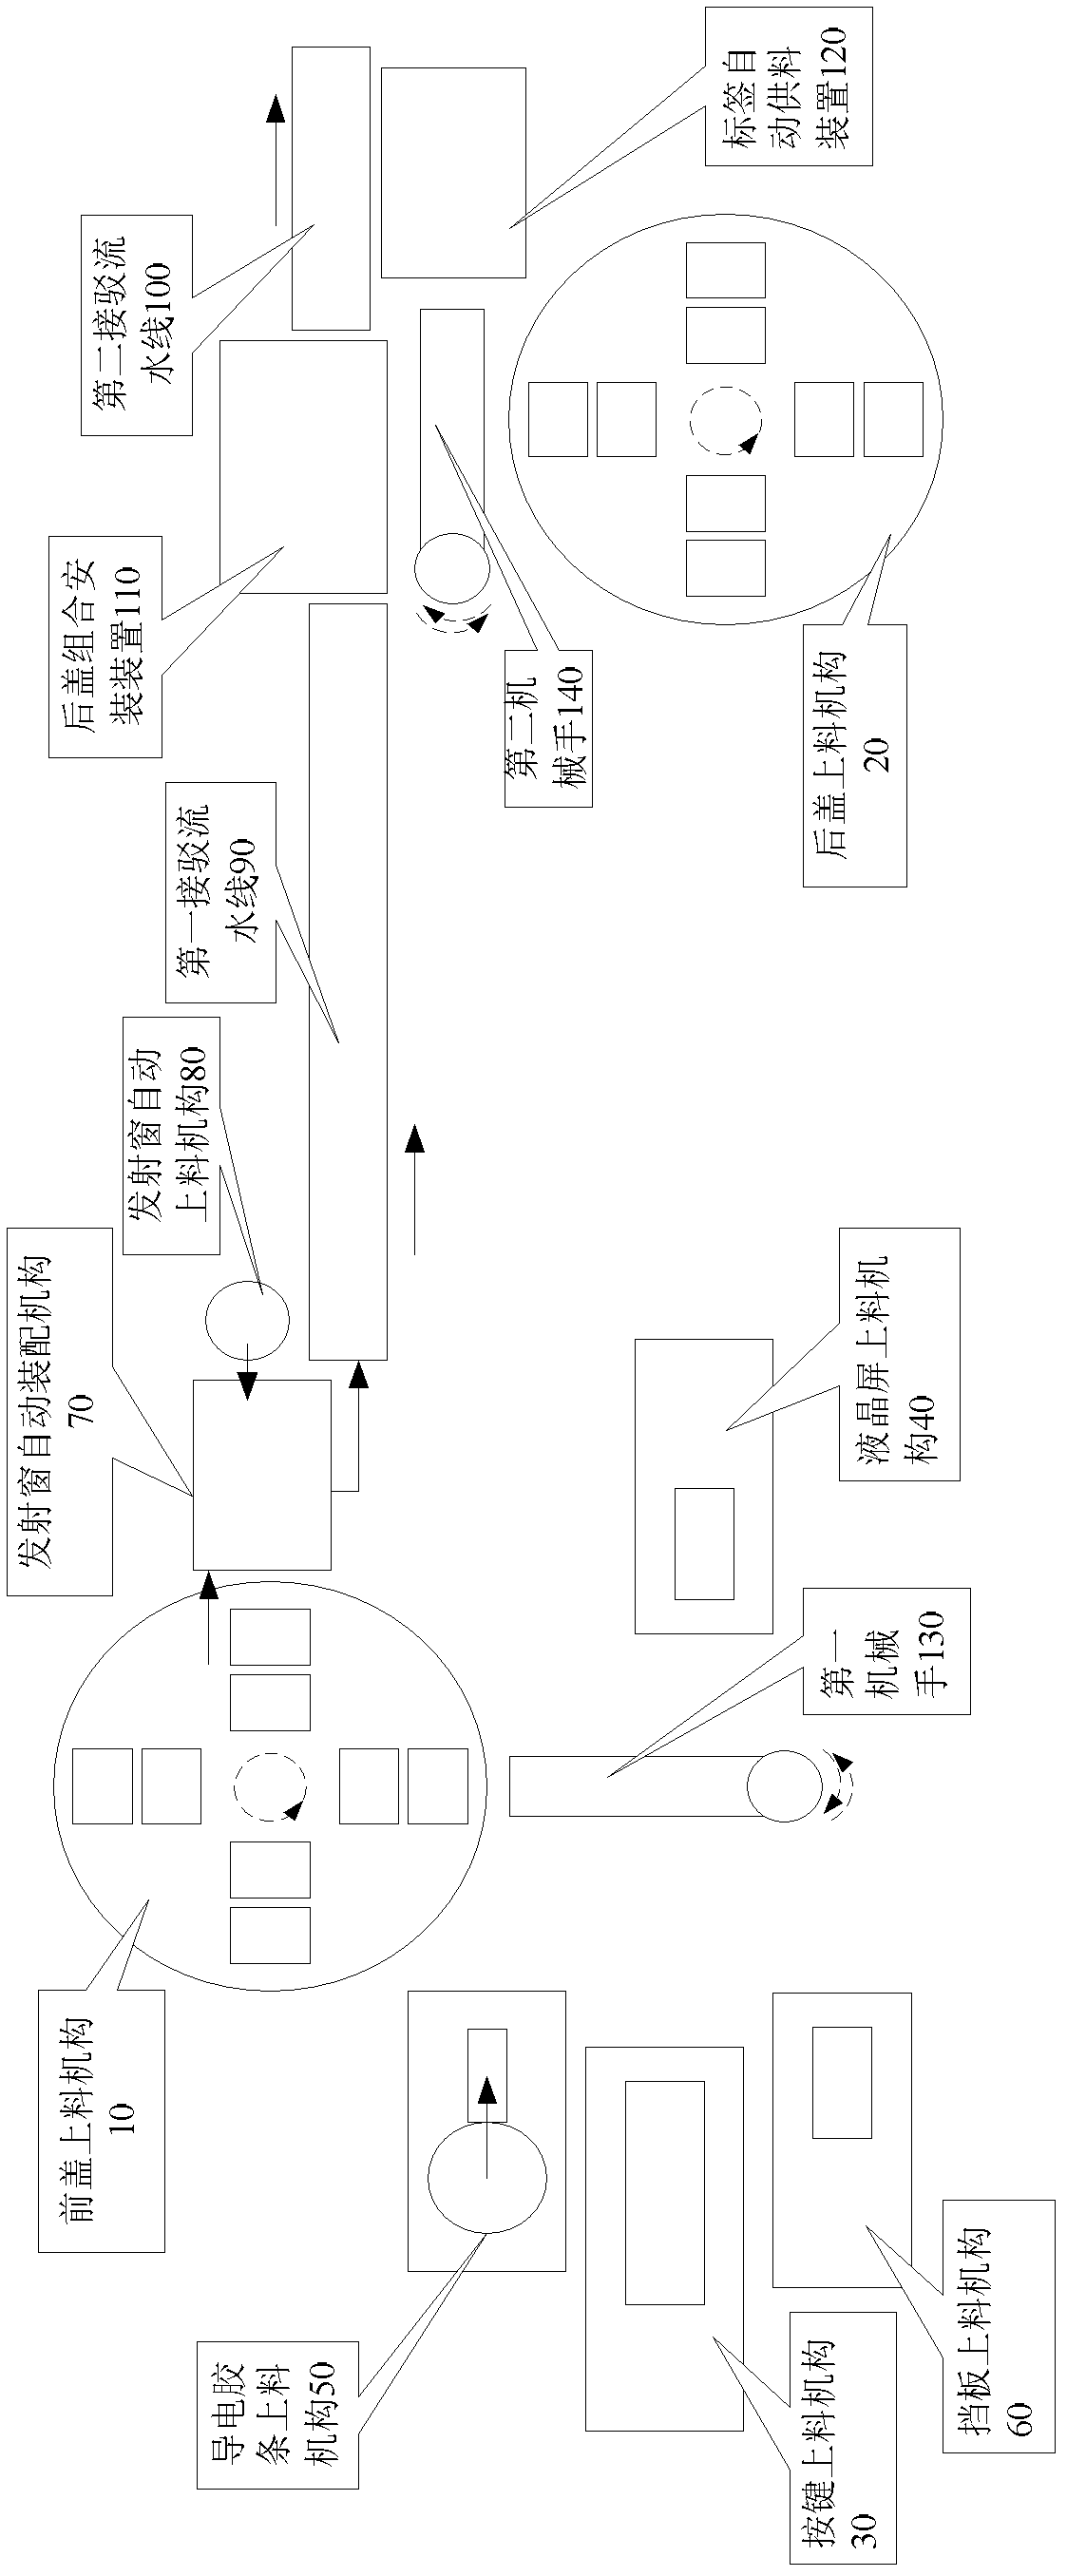 Assembly system and method for remote controller